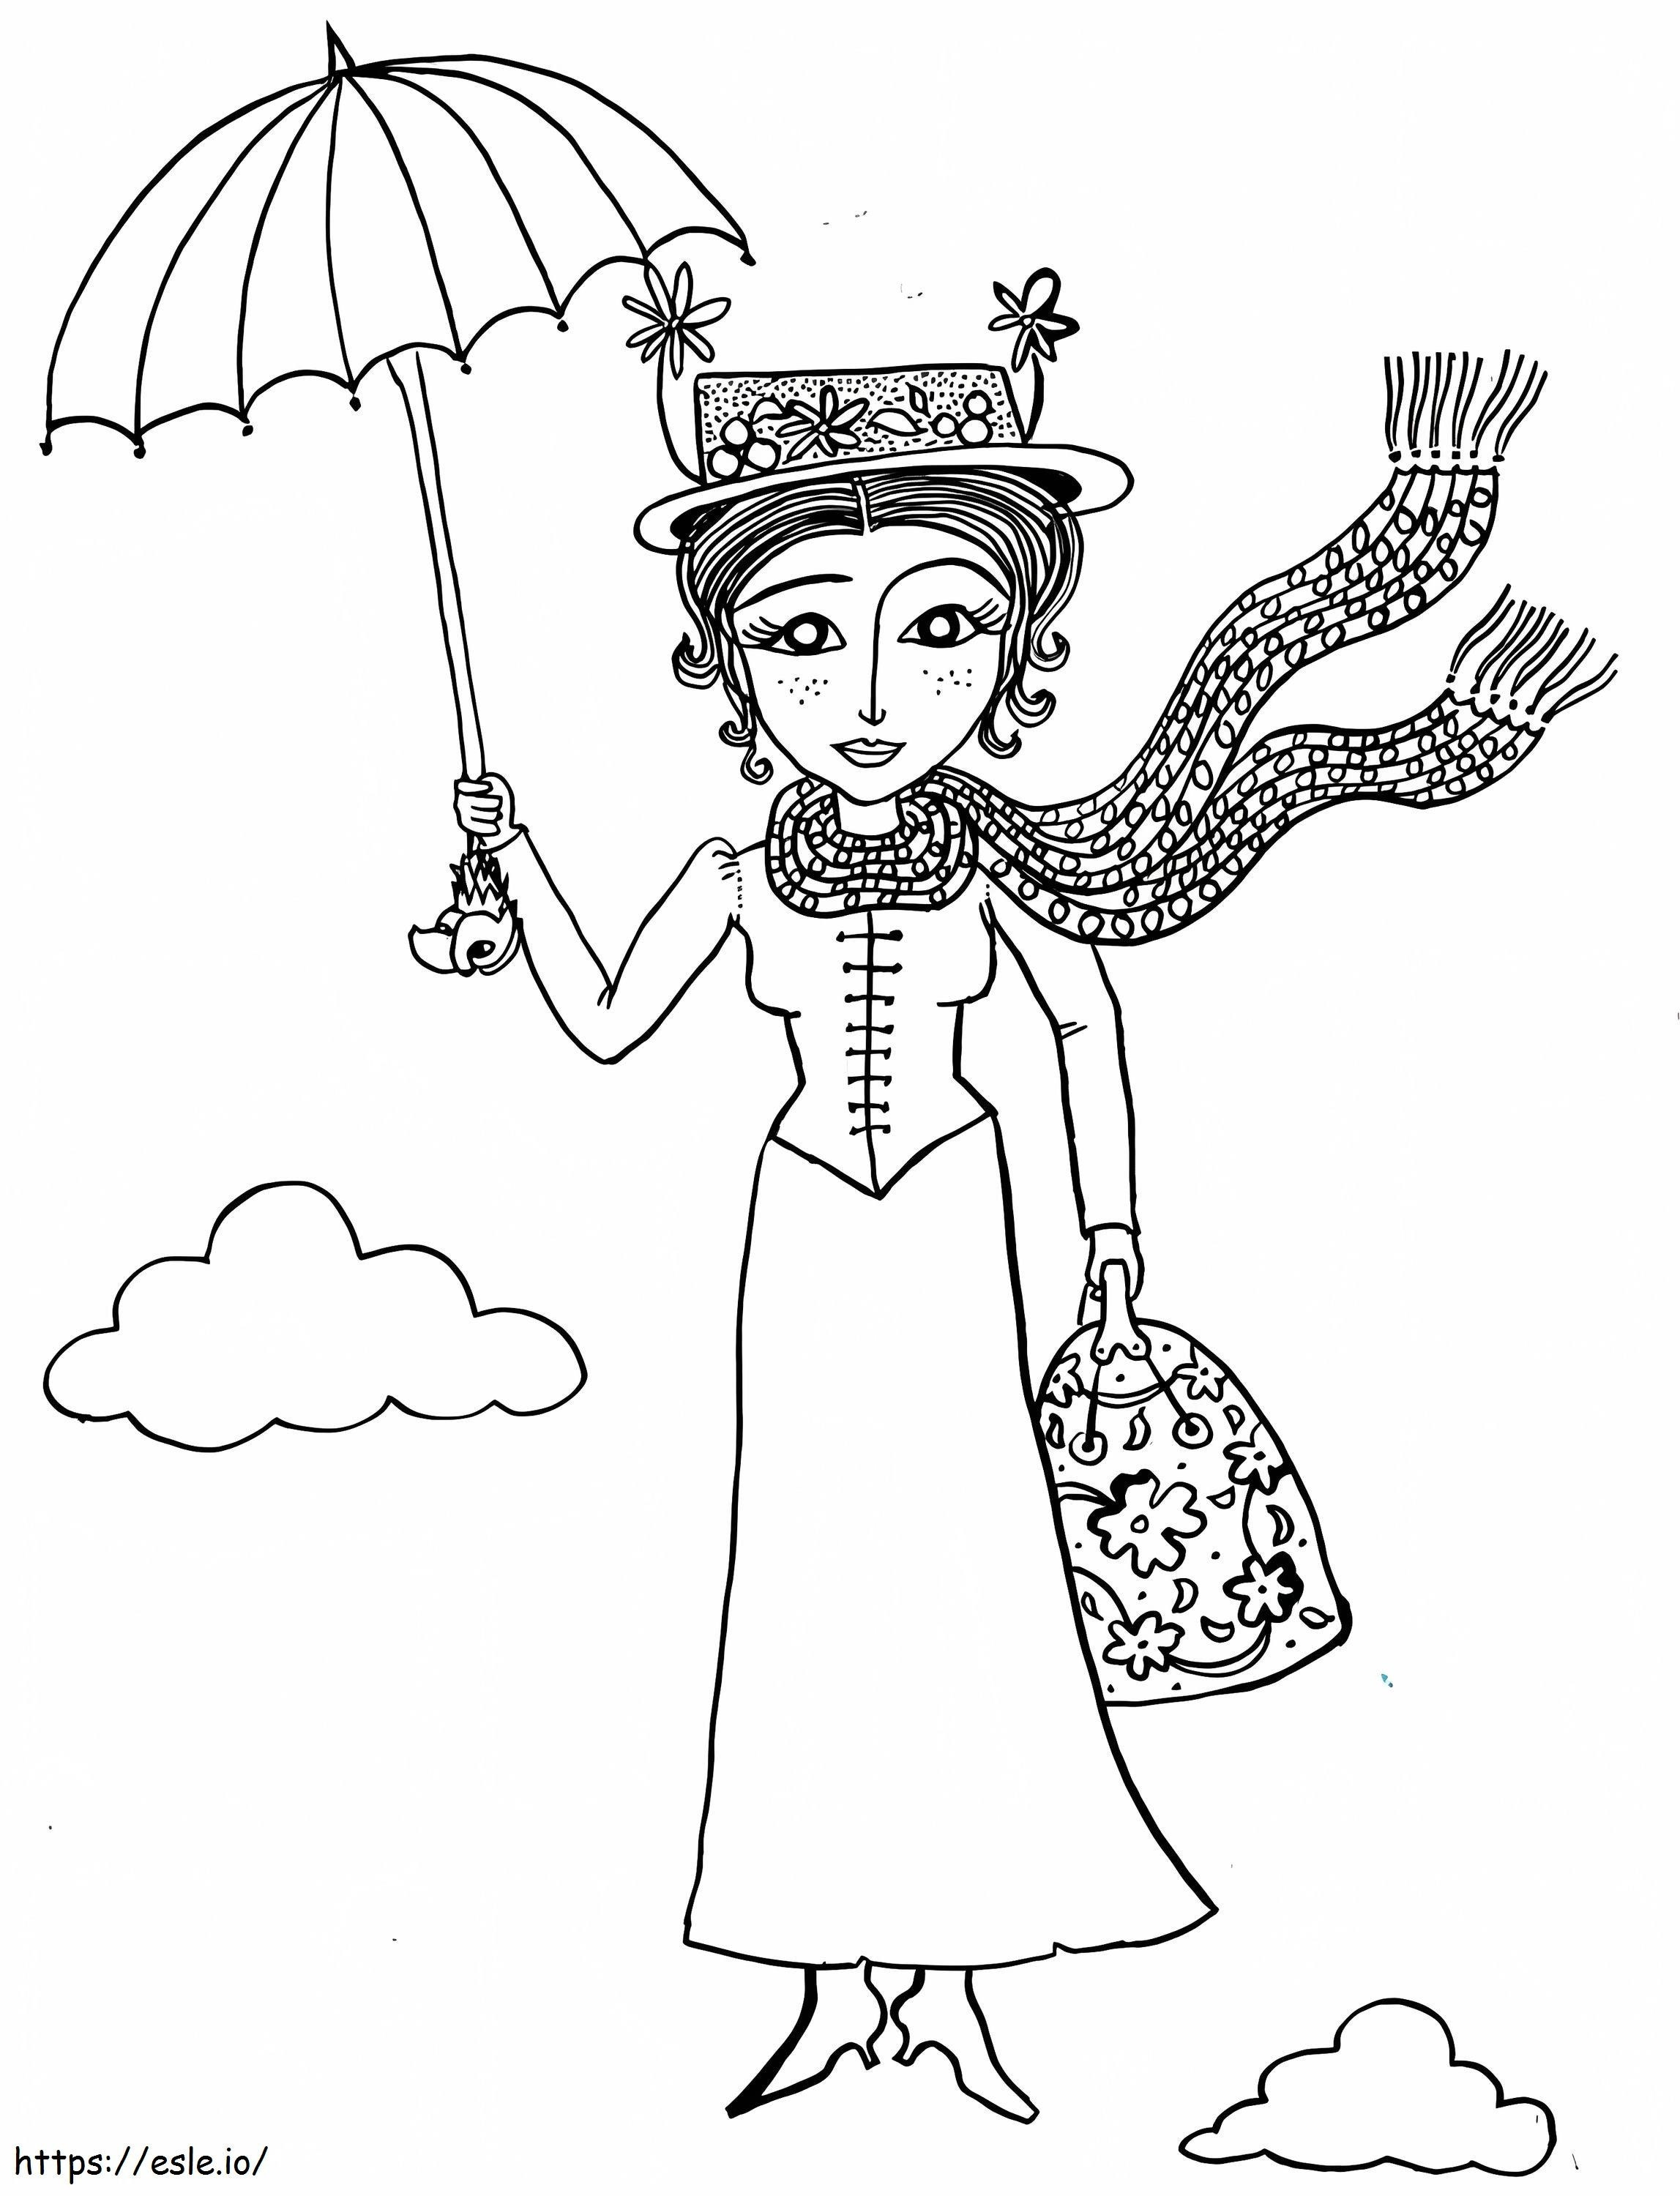 Mary Poppins 9 coloring page